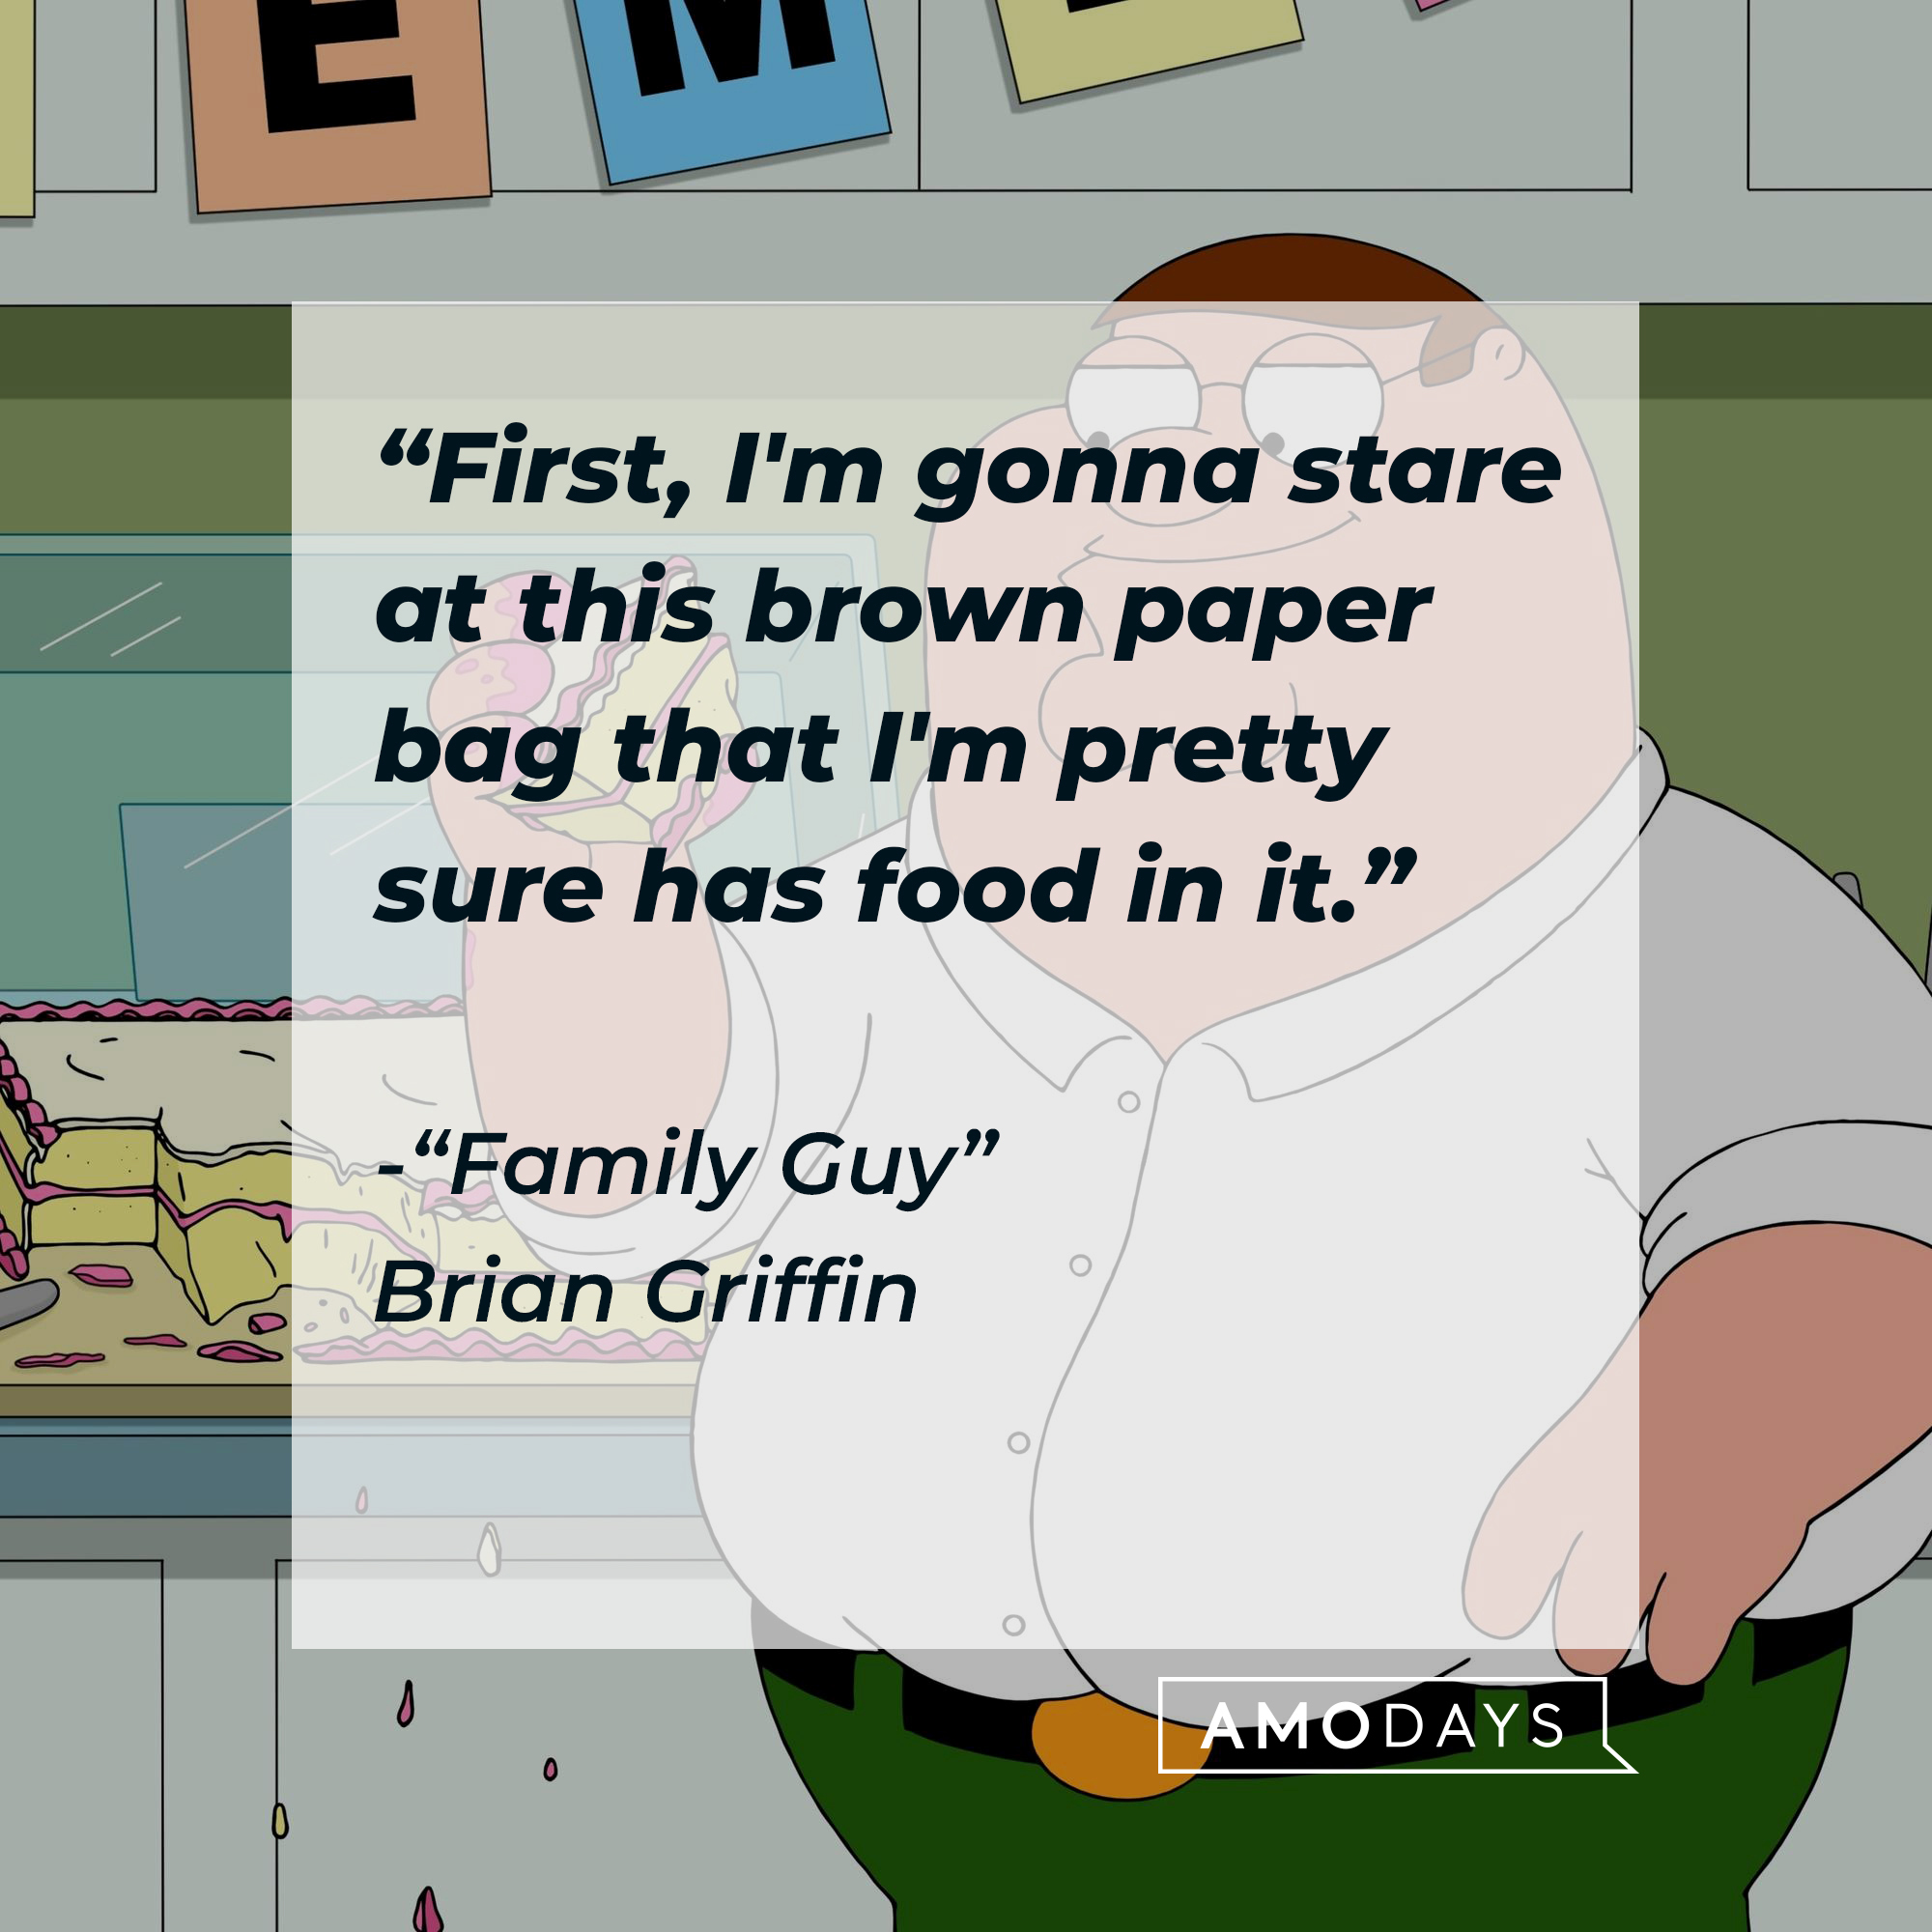 Peter Griffin with Brian Griffin's quote: “First, I'm gonna stare at this brown paper bag that I'm pretty sure has food in it." | Source: Facebook.com/FamilyGuy